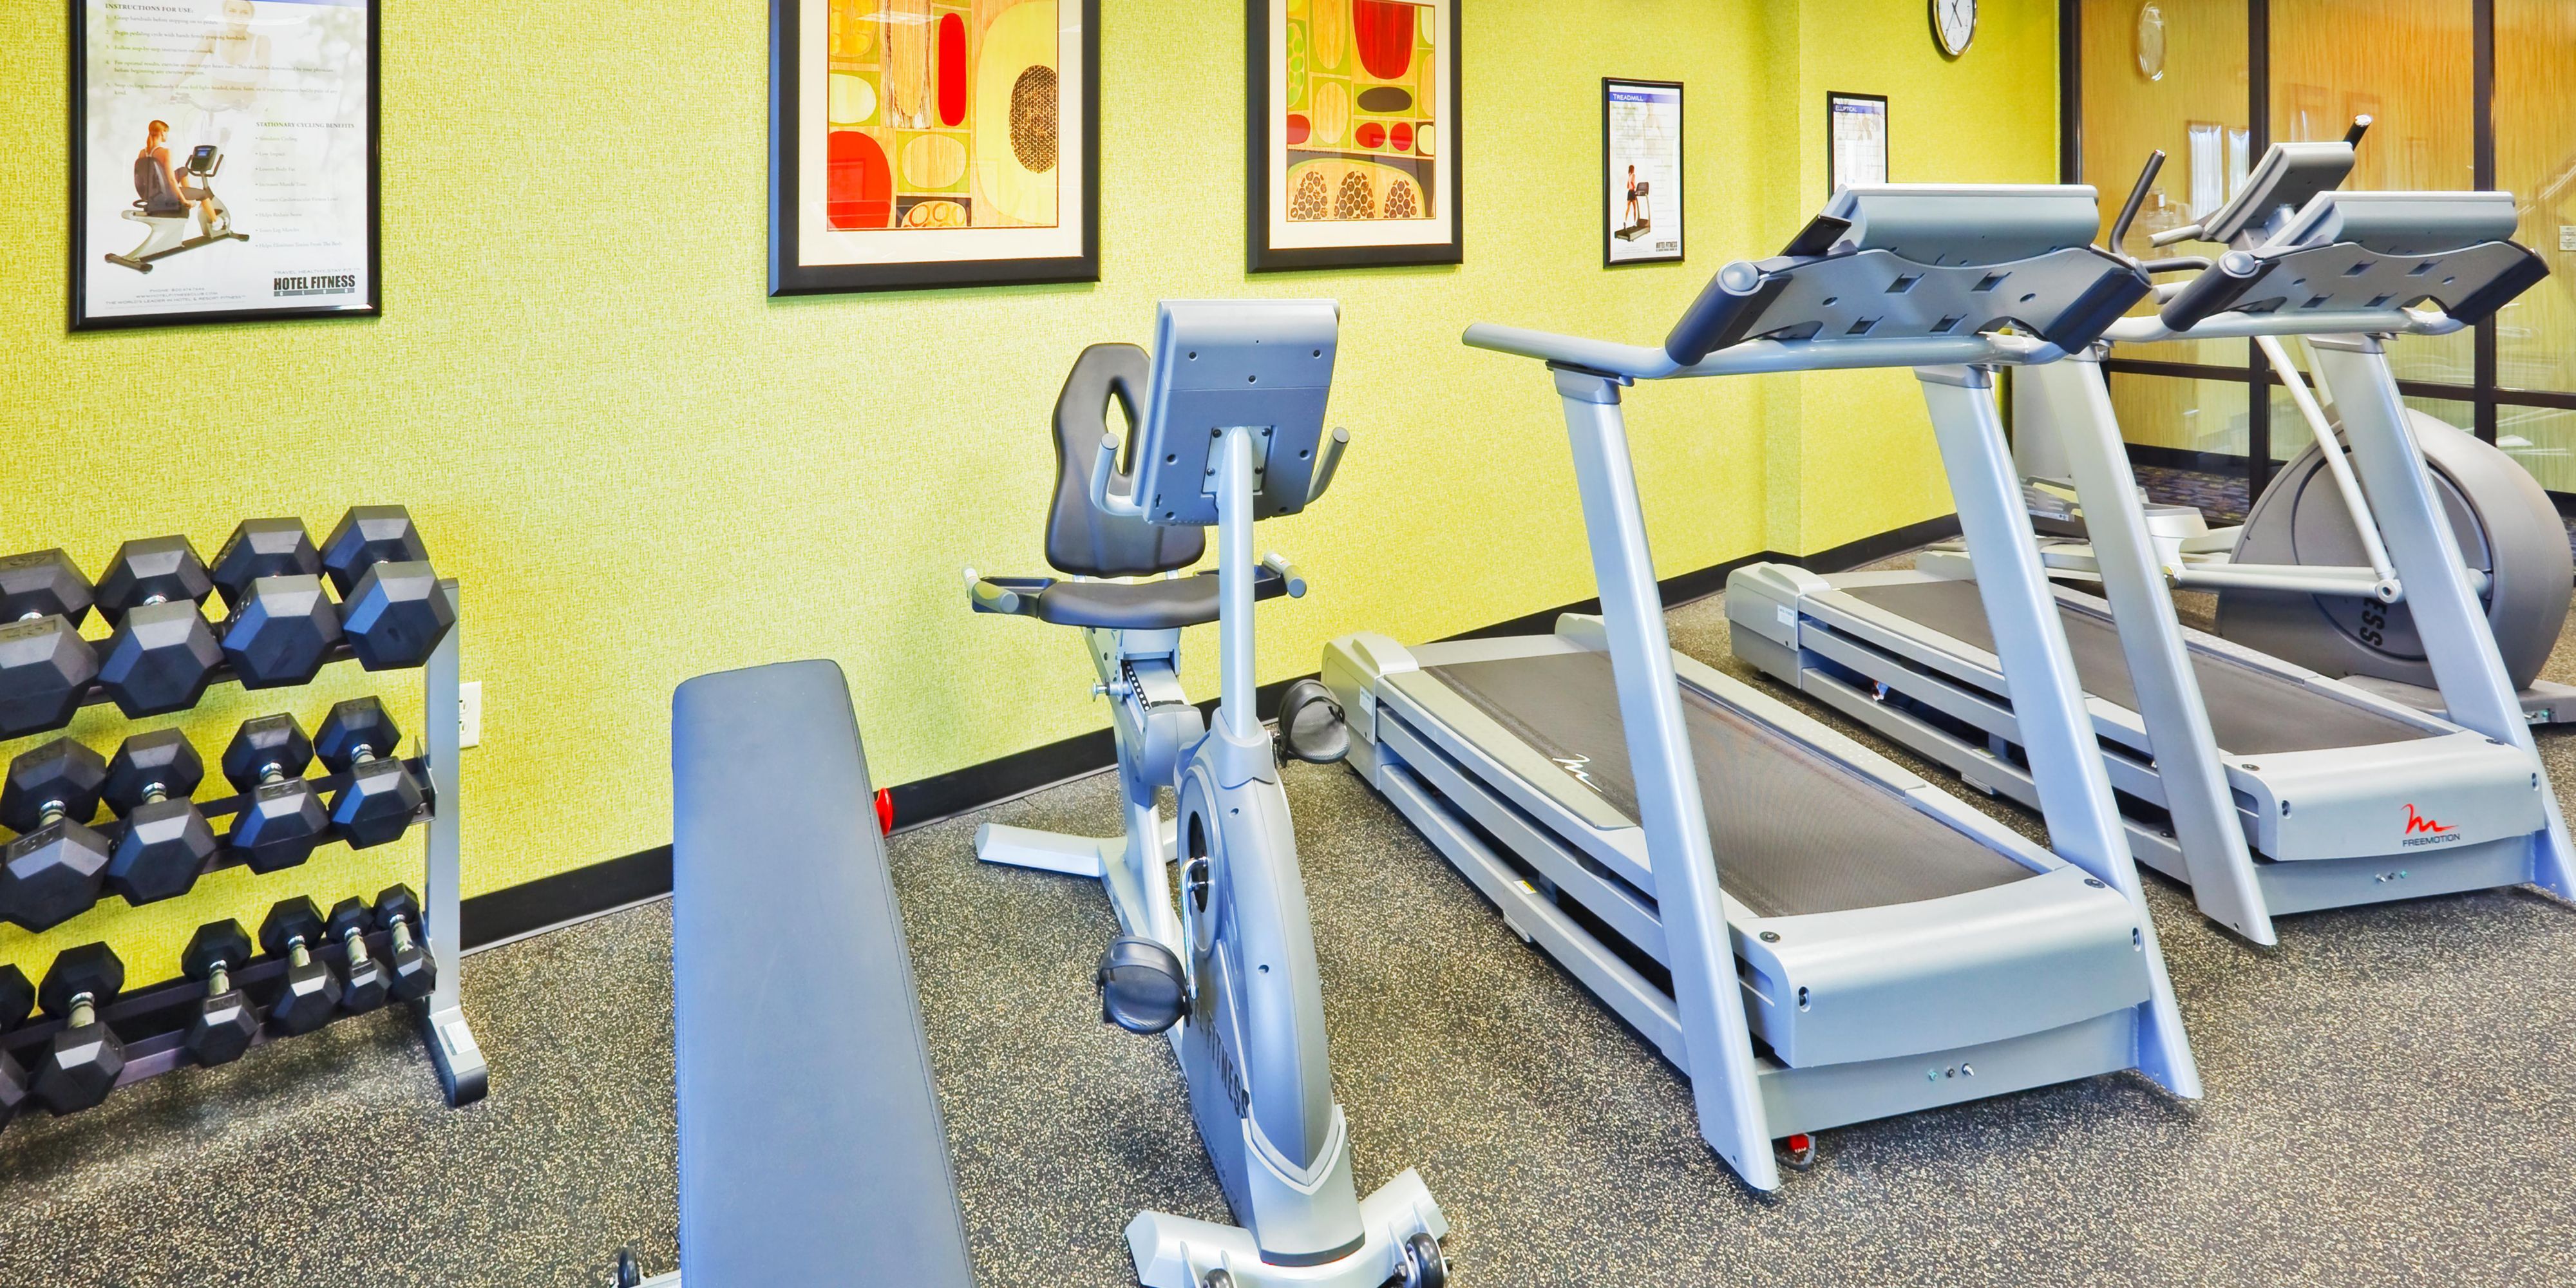 Fit travelers, don't sweat it, we've got you covered! You're welcome to go for a swim in our heated indoor pool or enjoy an invigorating workout in our complimentary Fitness Center. You'll find treadmills, elliptical machines, free weights or a stationary bicycle available just for you! Stay smart and fit when you stay with us!